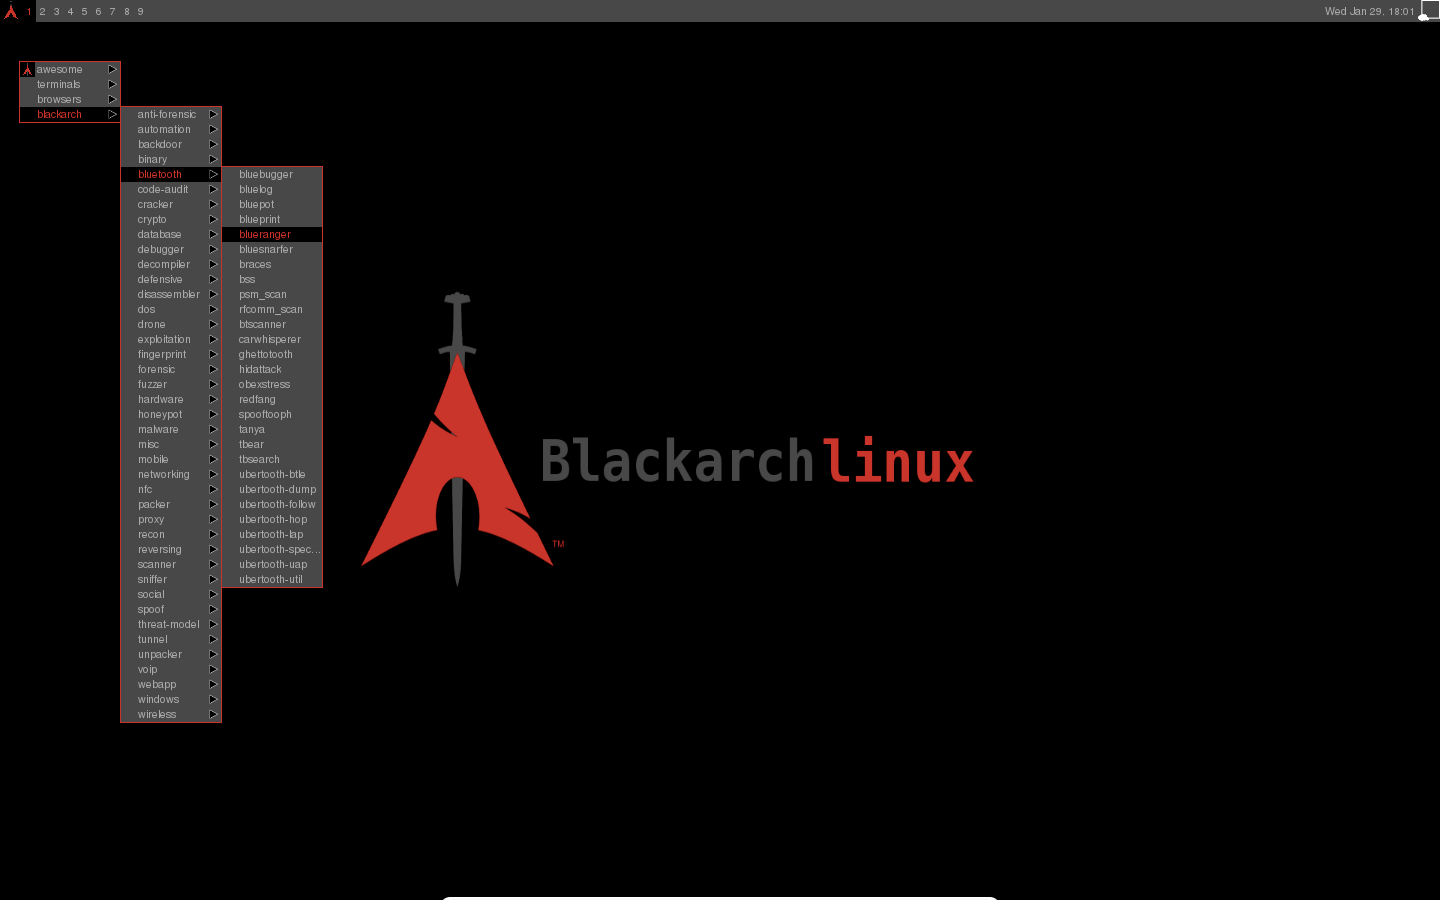 Hacking Distro, BlackArch Linux Update Released; Download now